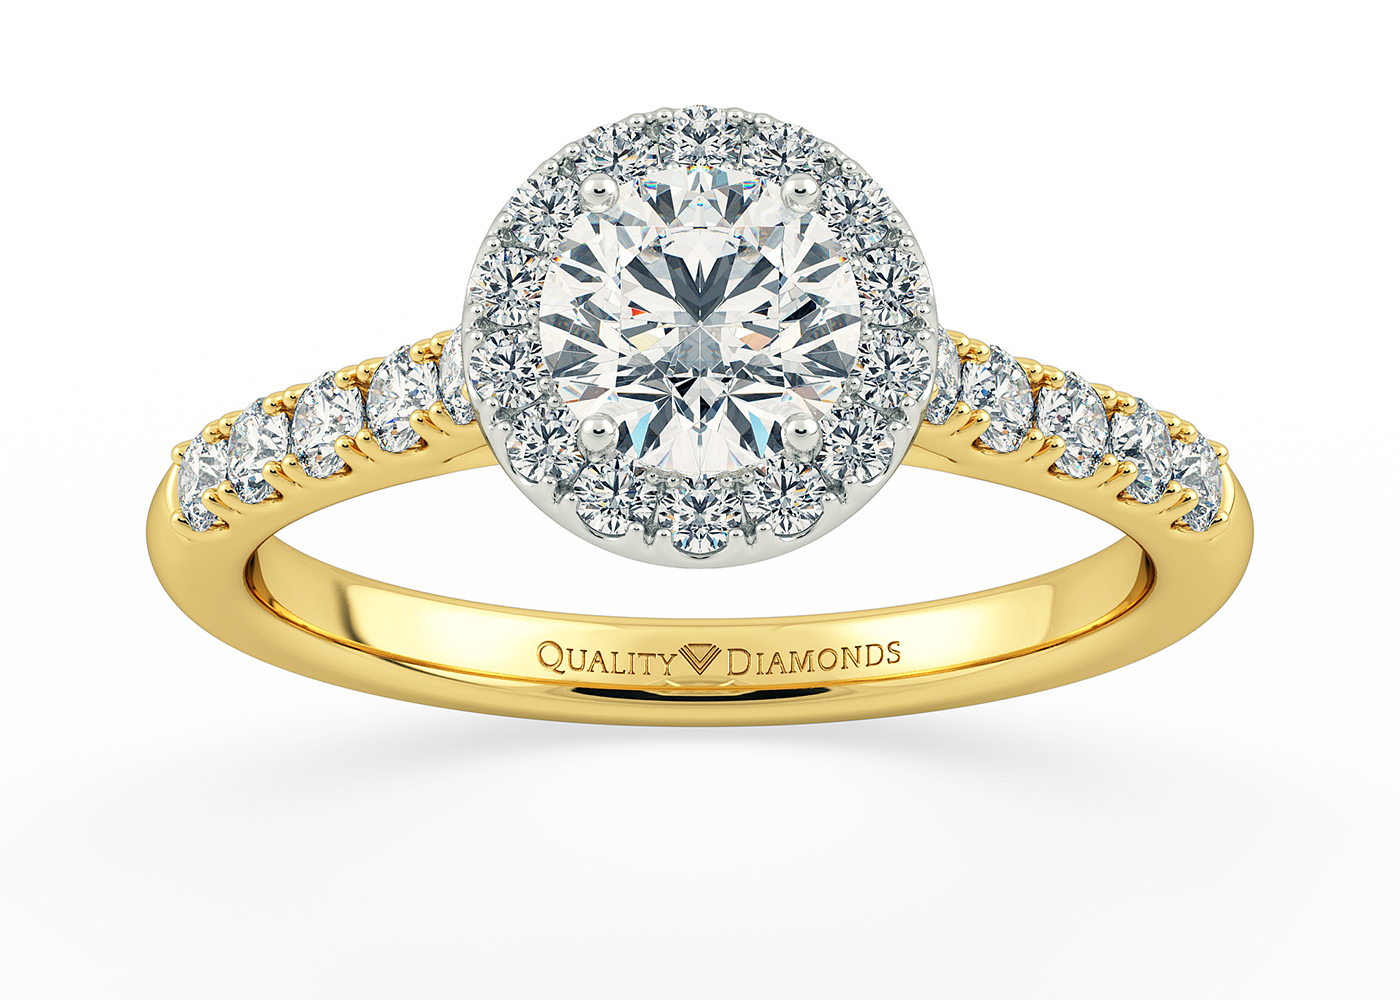 Two Carat Halo Round Brilliant Diamond Ring in 18K Yellow Gold